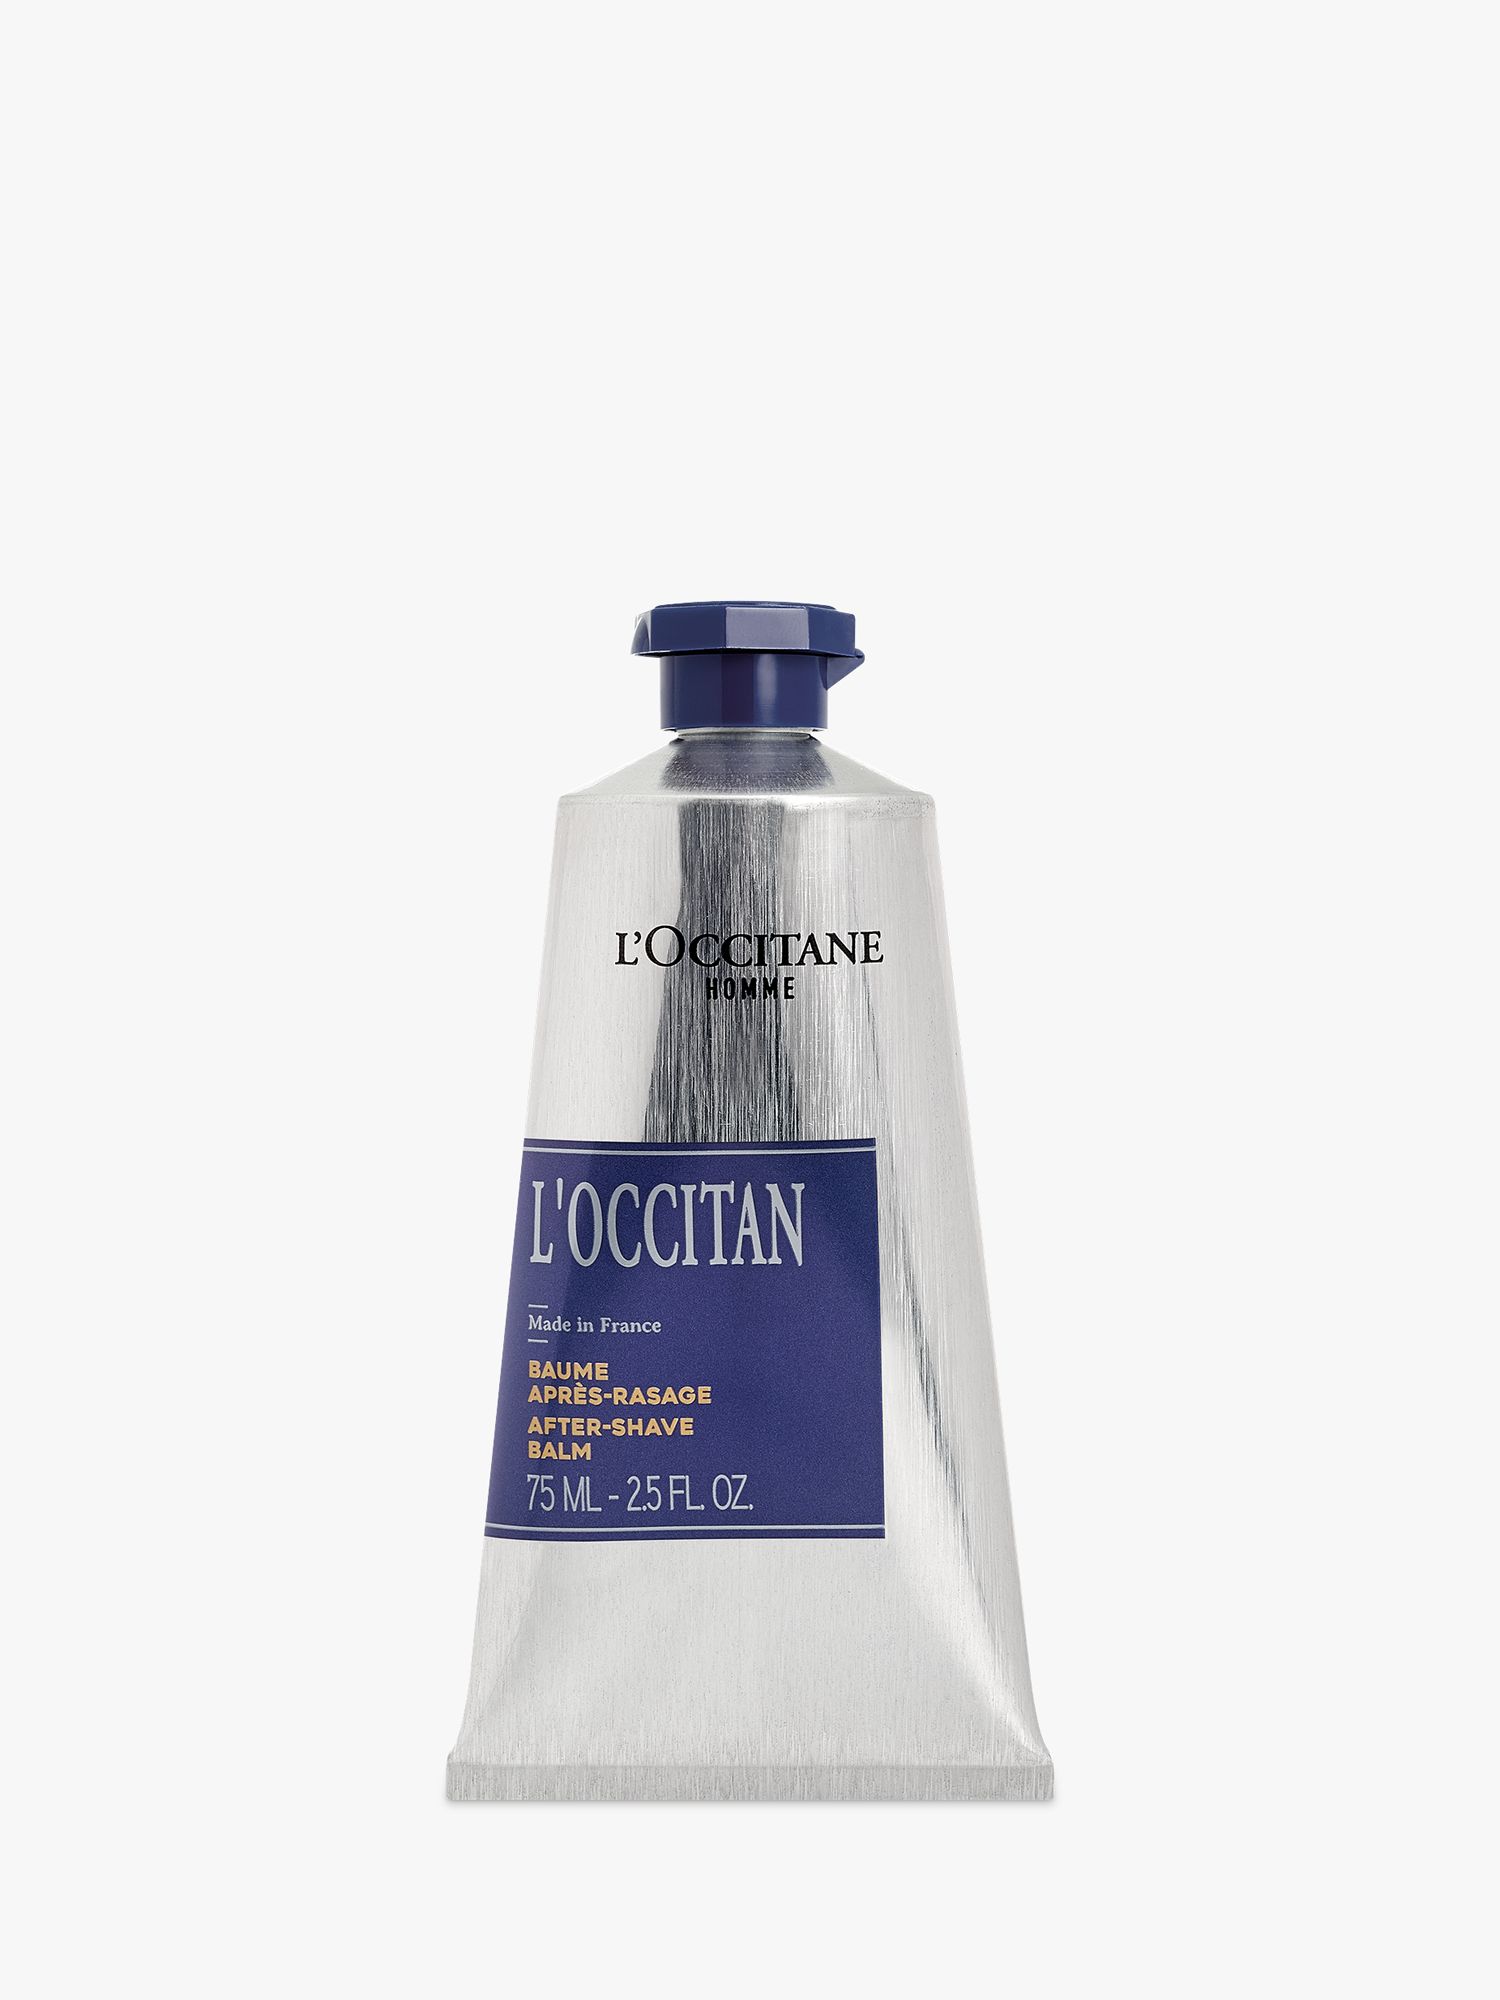 L'OCCITANE Homme After Shave Balm, 75ml